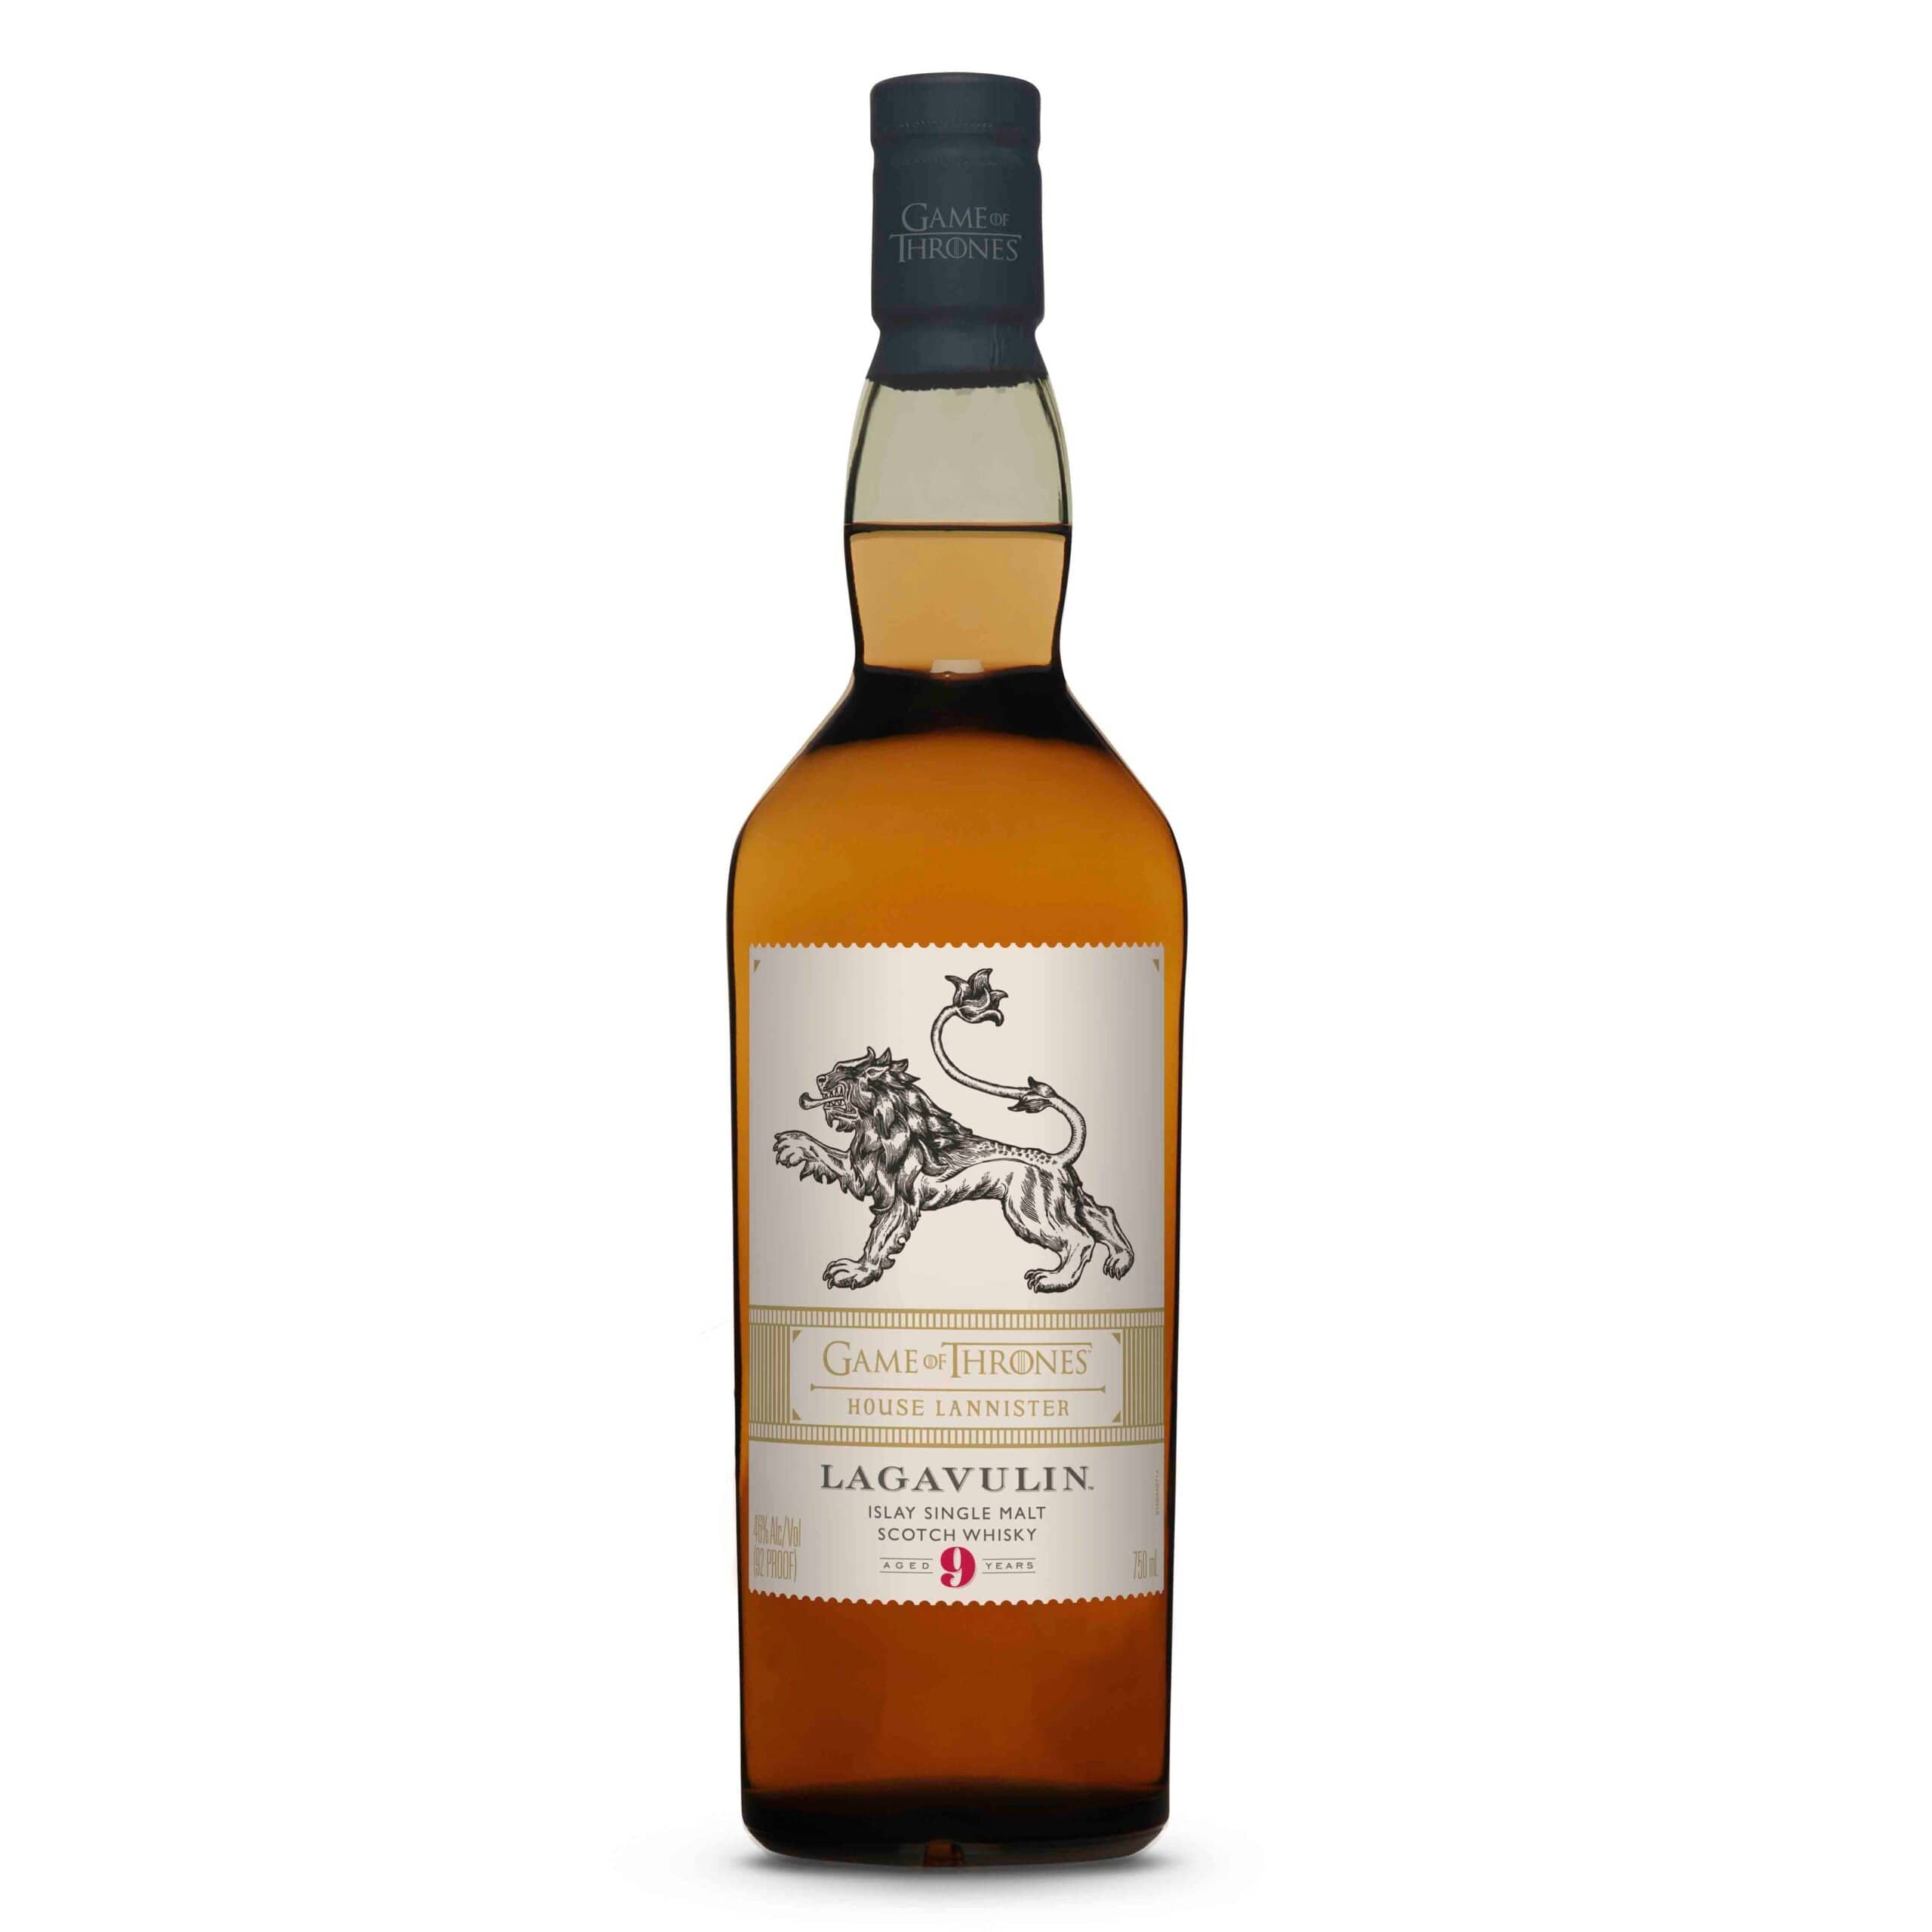 Lagavulin 9 Year Old Game of Thrones House Lannister - Barbank